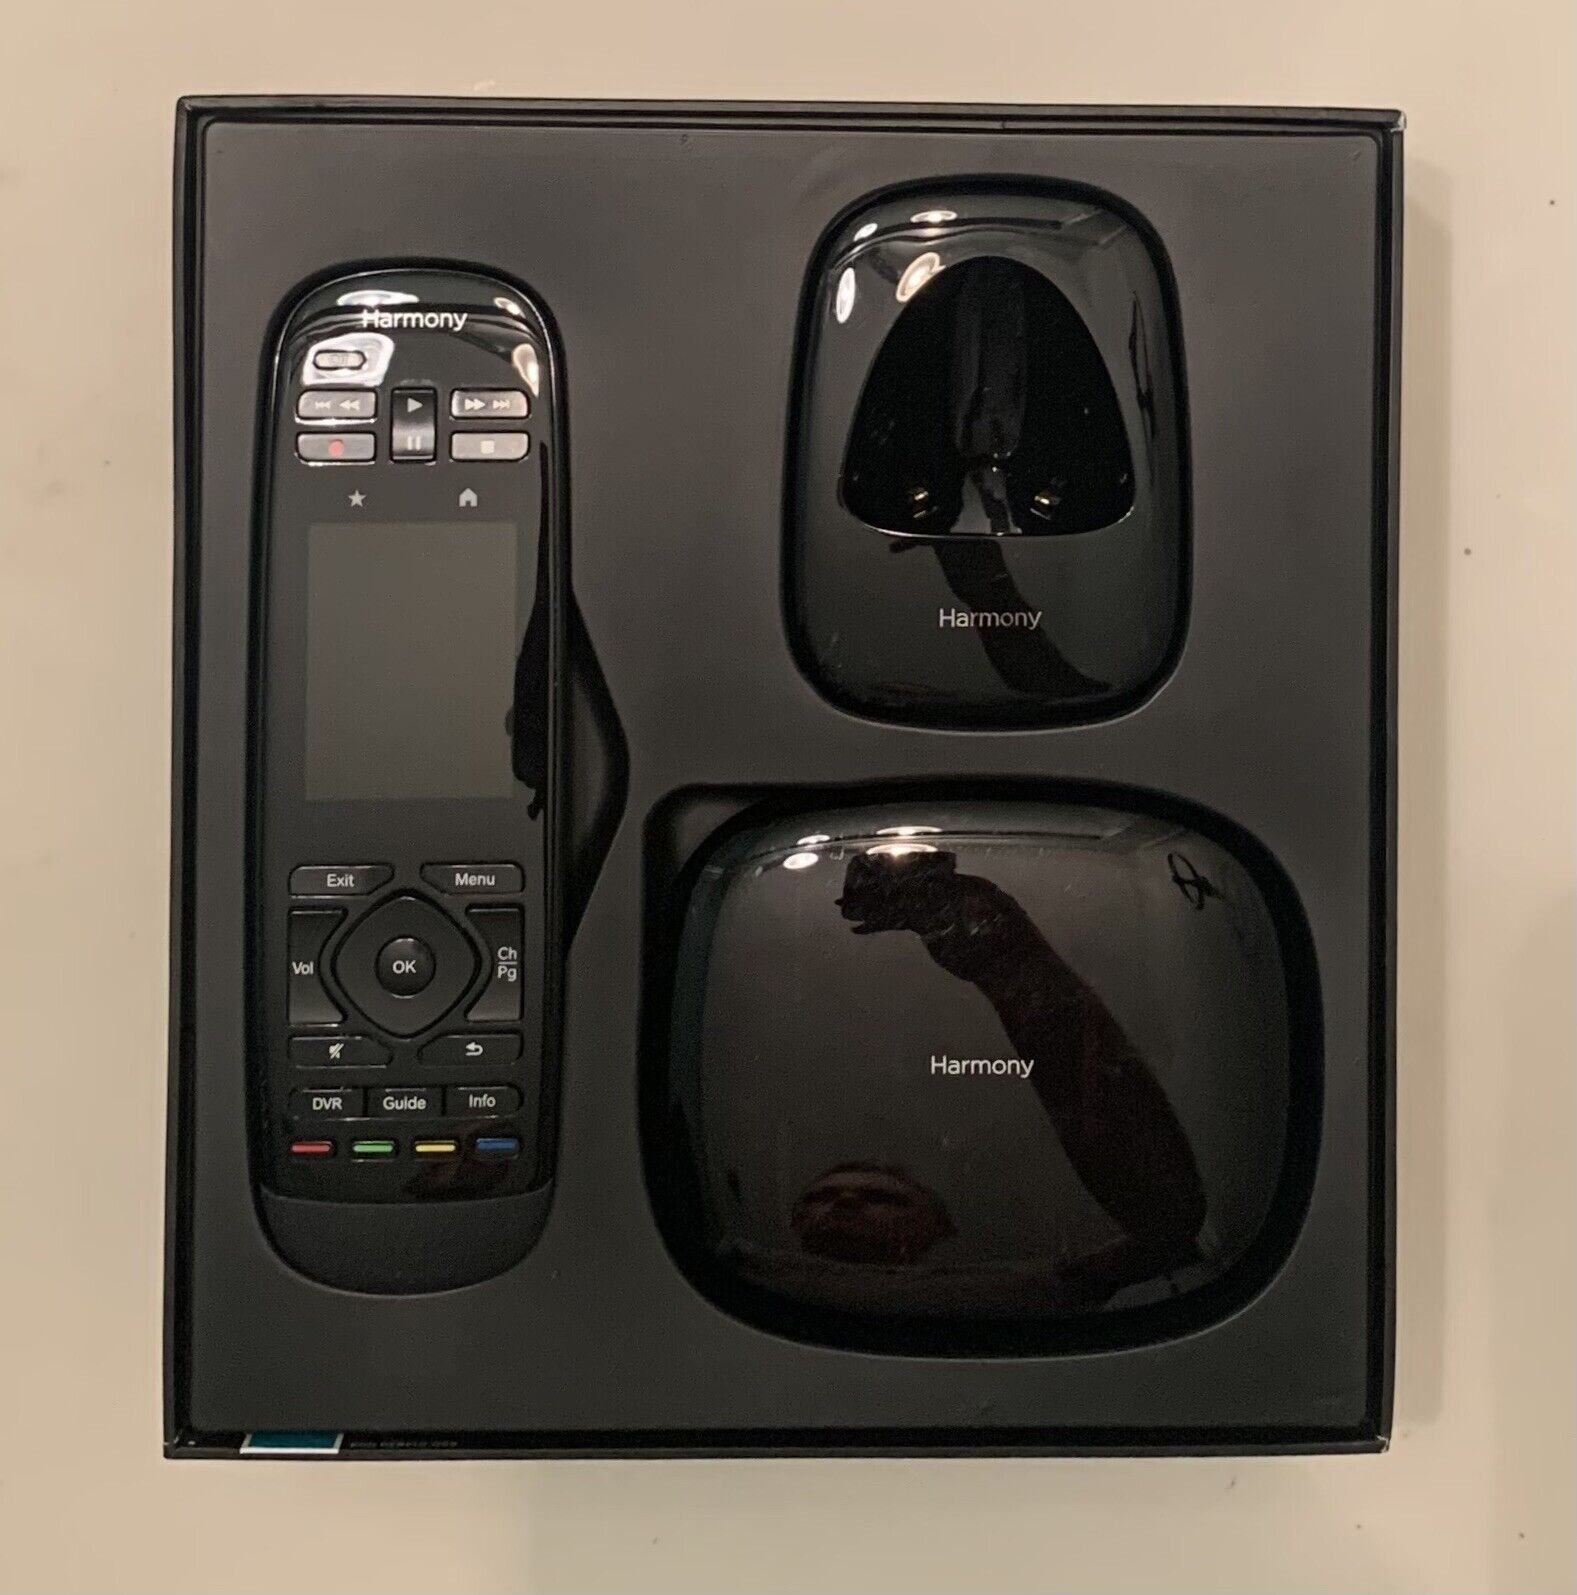 VERY NICE Logitech Harmony Ultimate Home Remote Control System, 915-000264